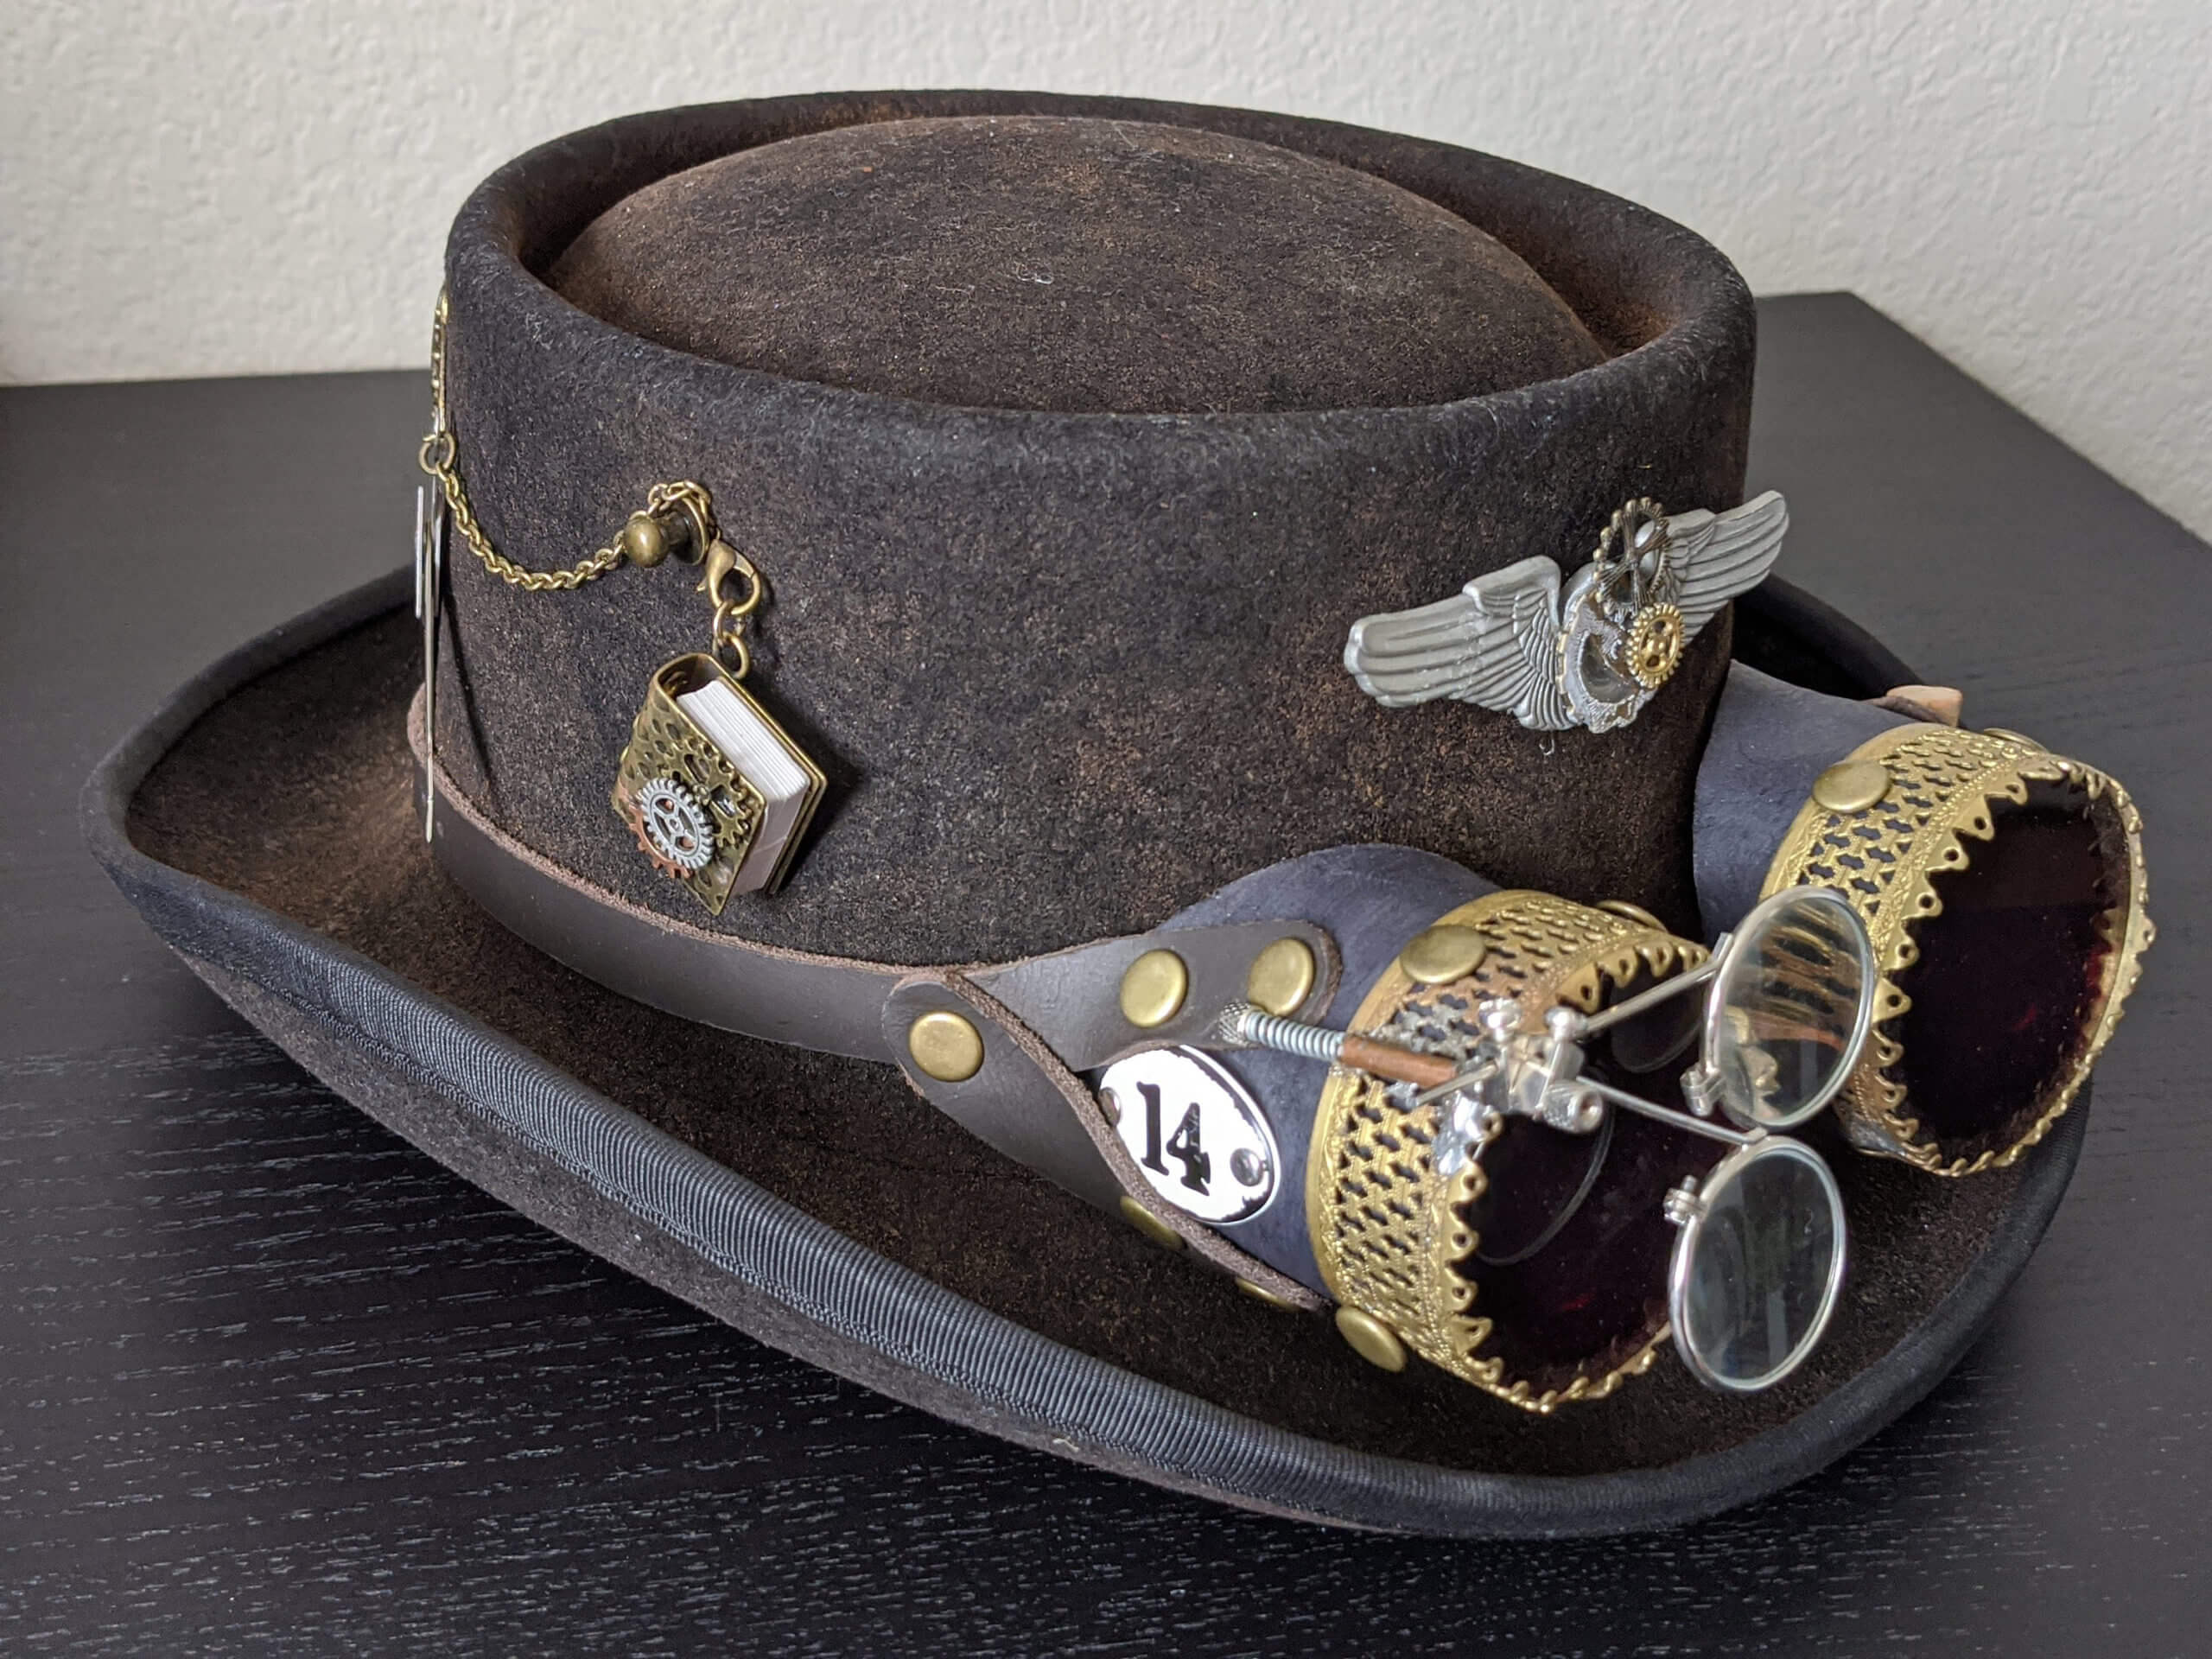 How to Wear Casual Everyday Steampunk Fashion with Your Modern